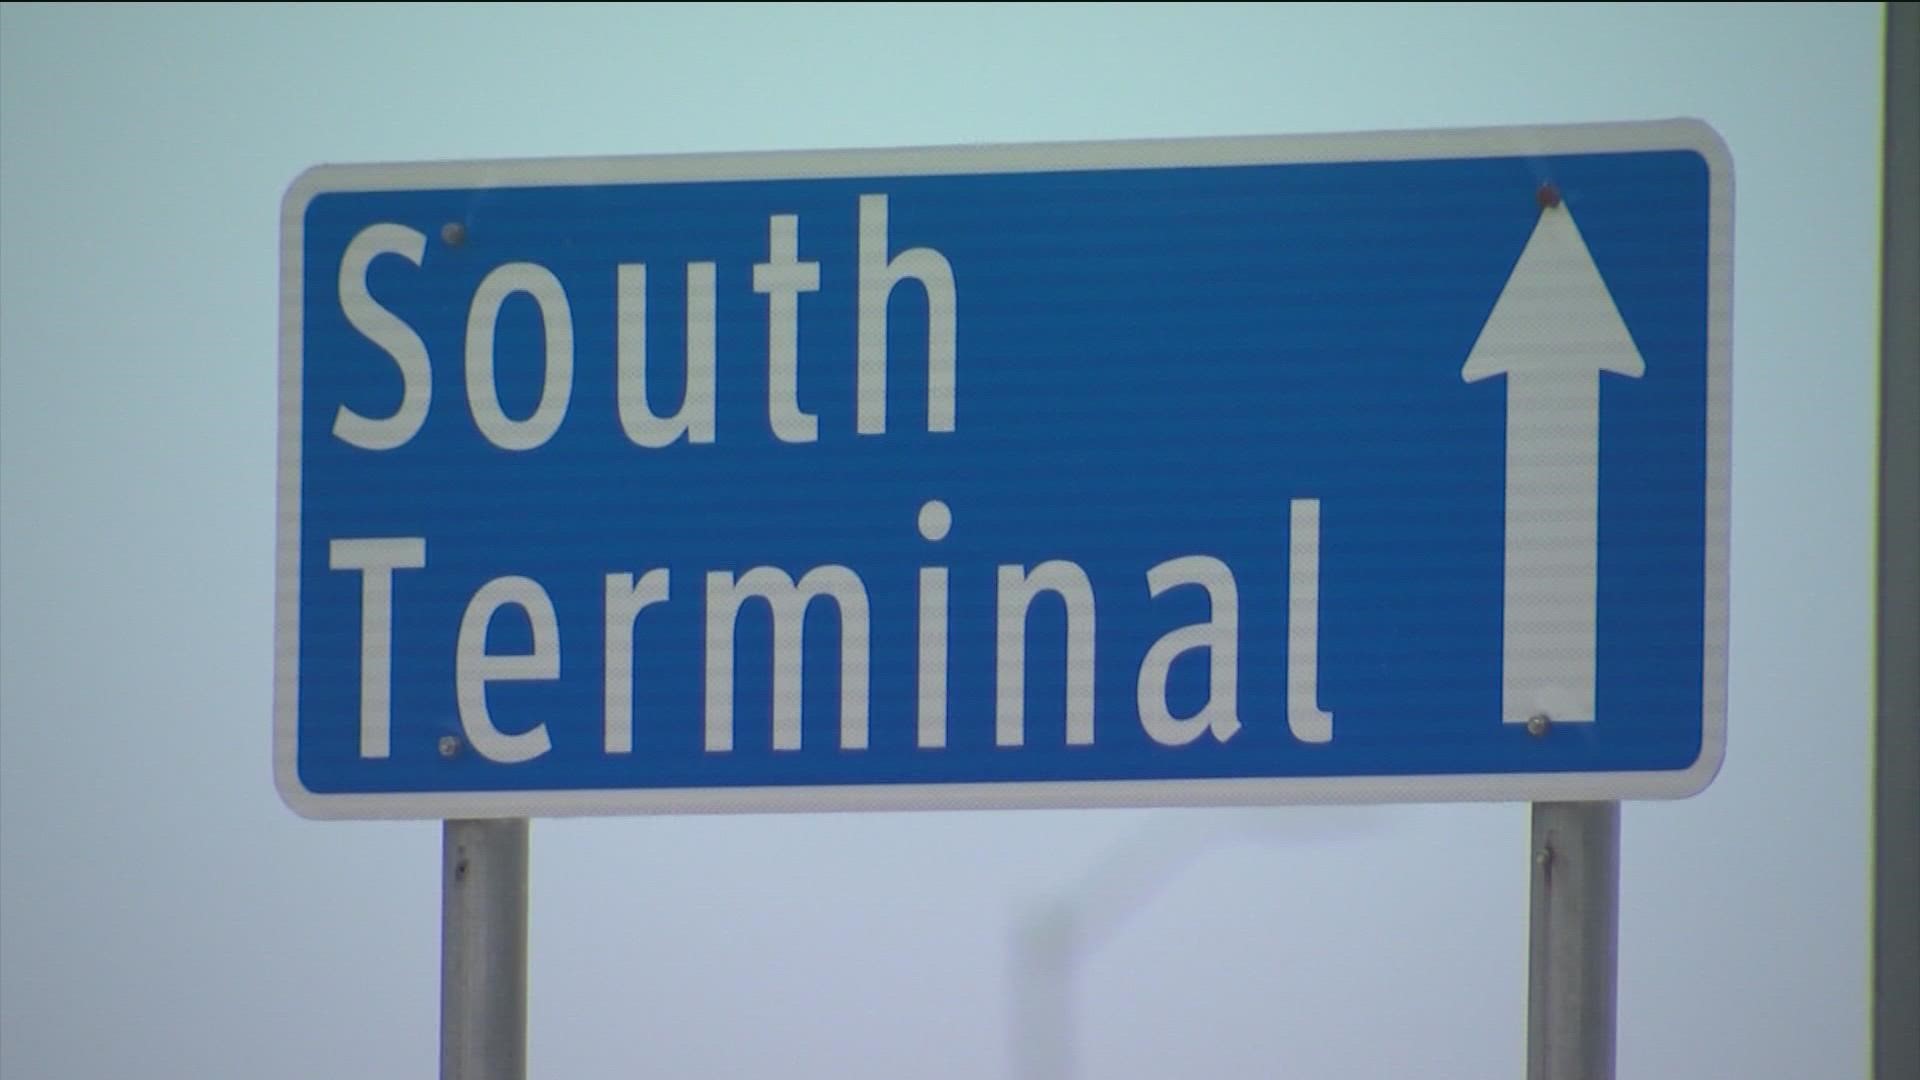 The company that operates the south terminal has urged the council to vote against closing it.